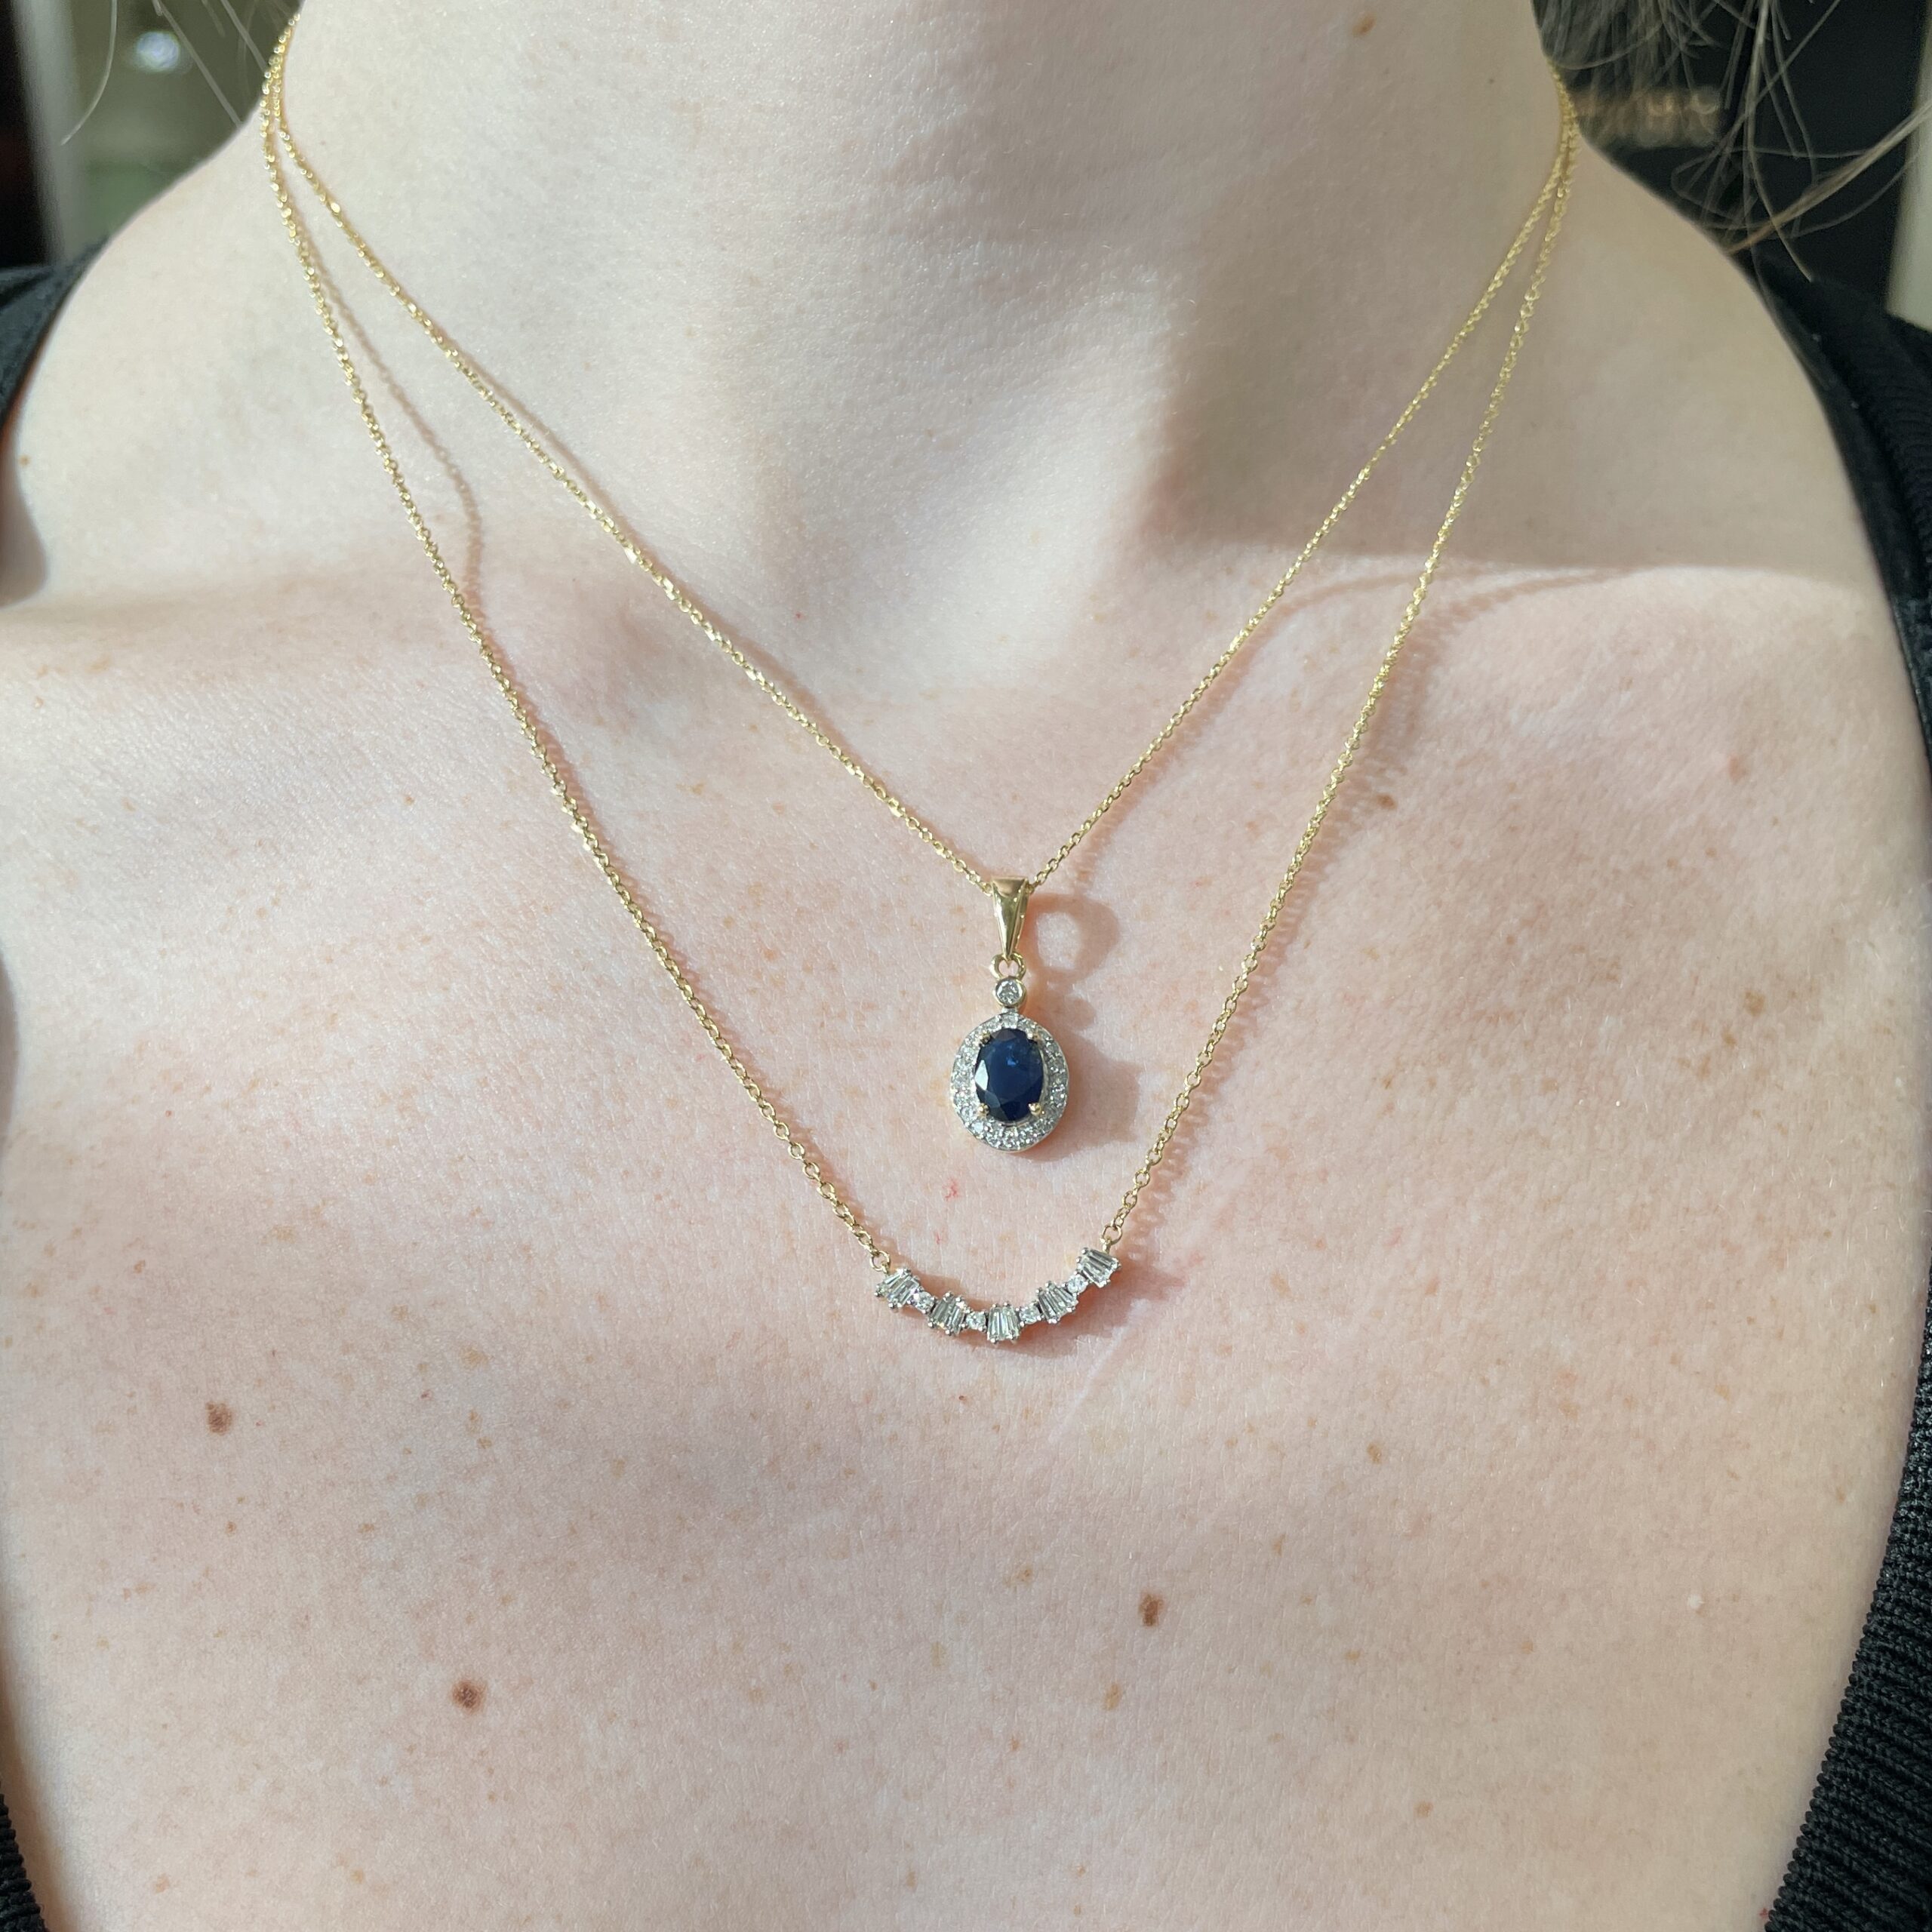 Yellow Gold Sapphire and Diamond Pendant Necklace